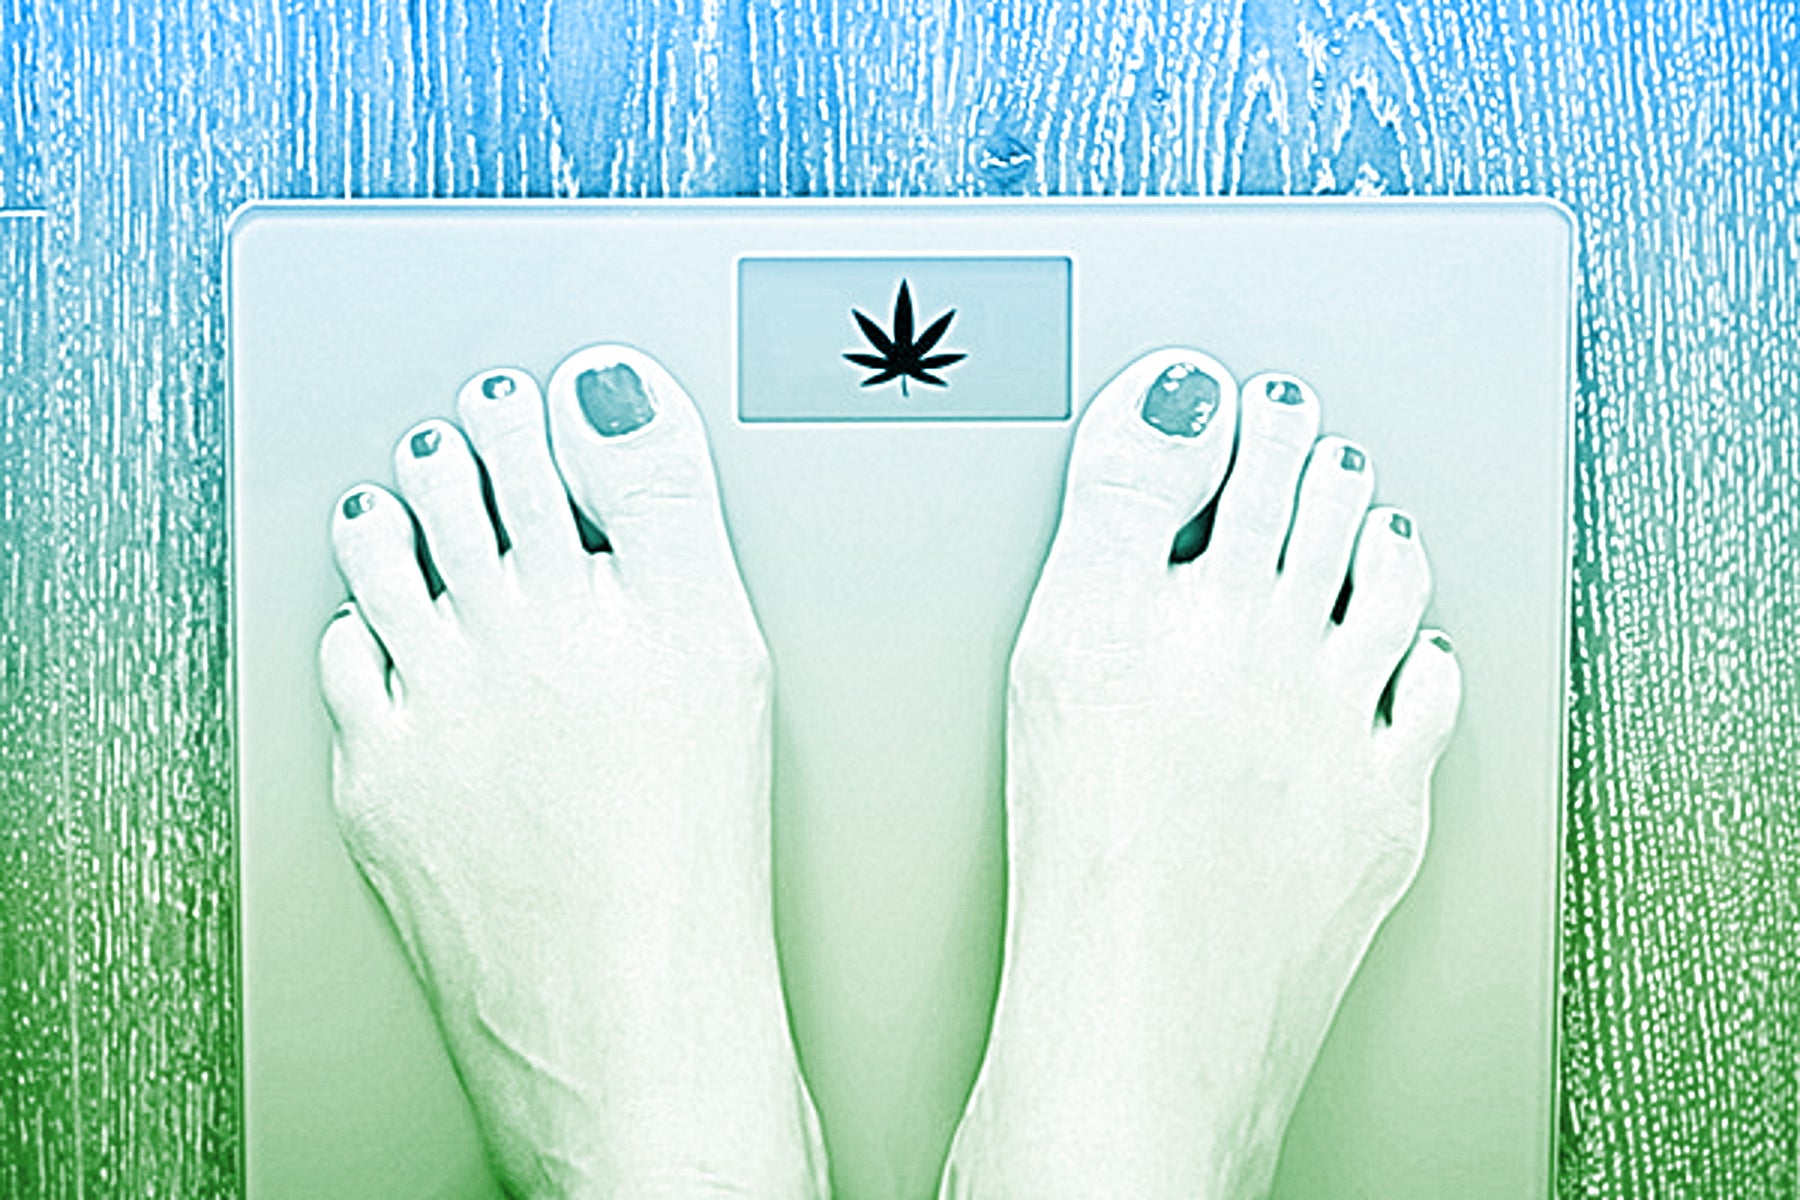 Can Cannabis Really Help You Lose Weight?